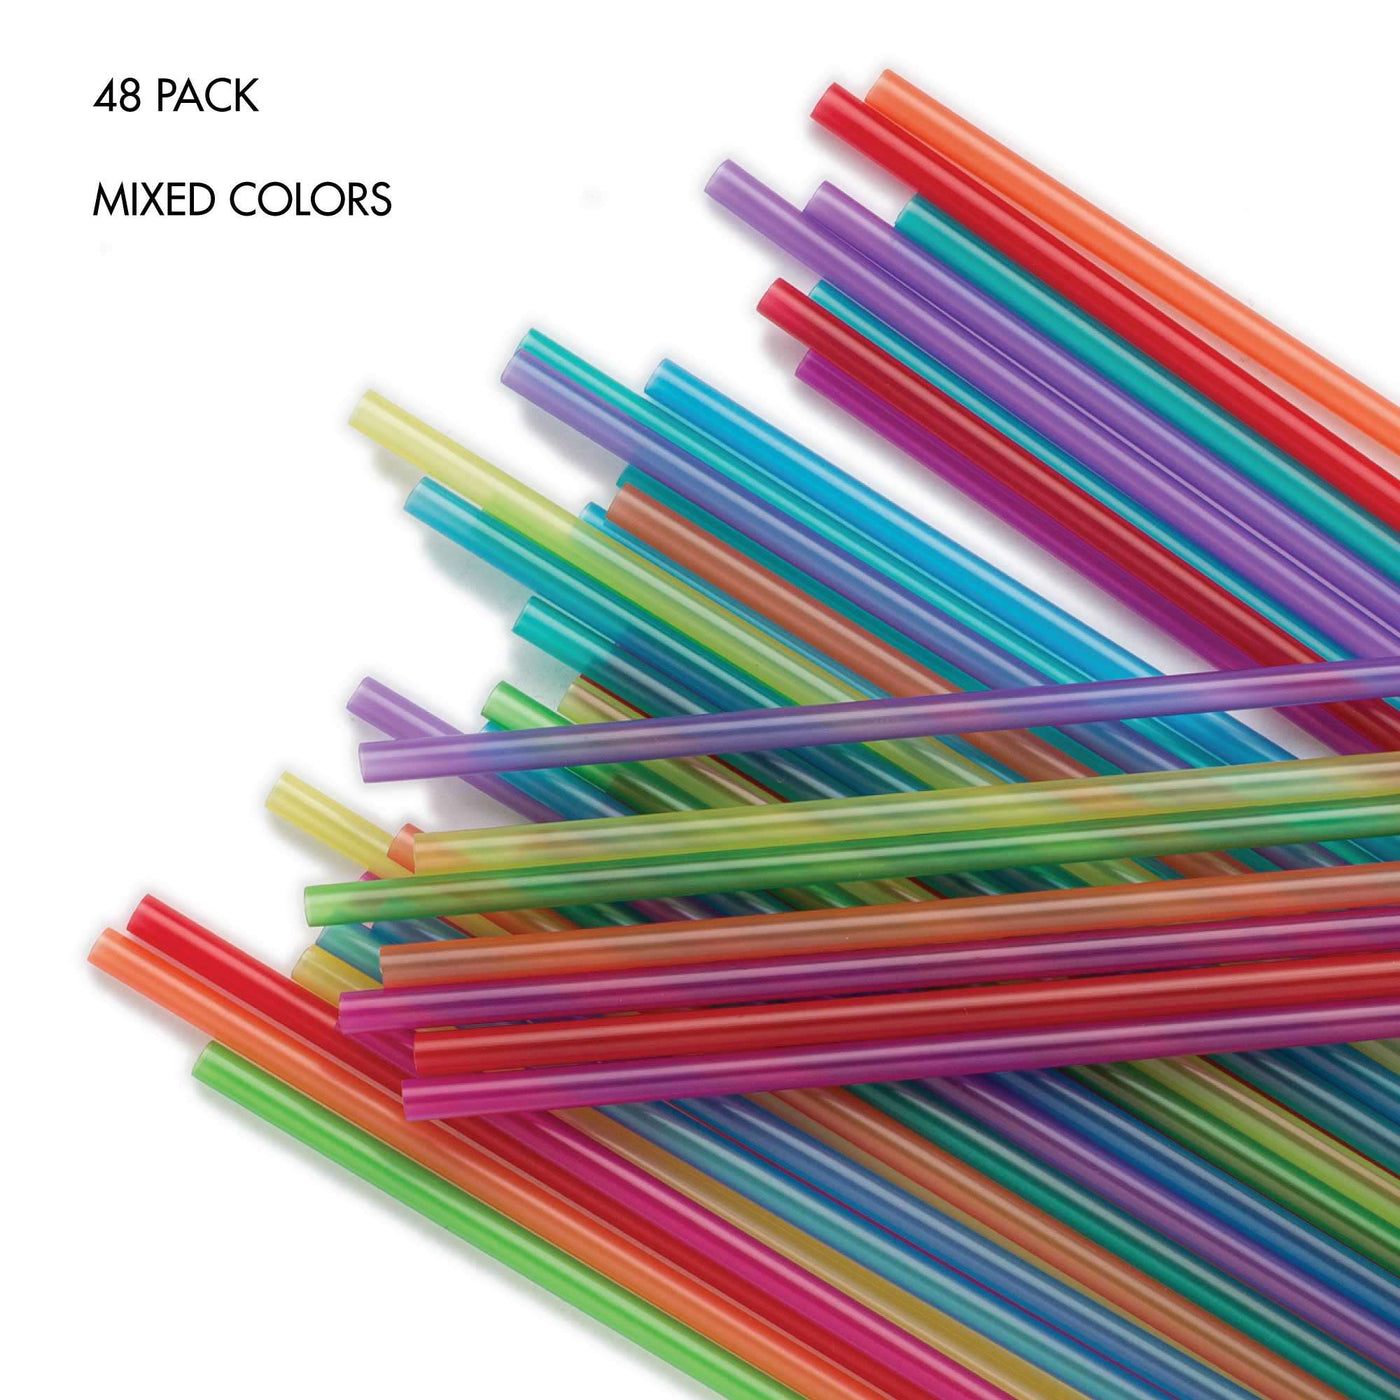 Straw, Rainbow Colored Replacement Drinking Straws For Stanley